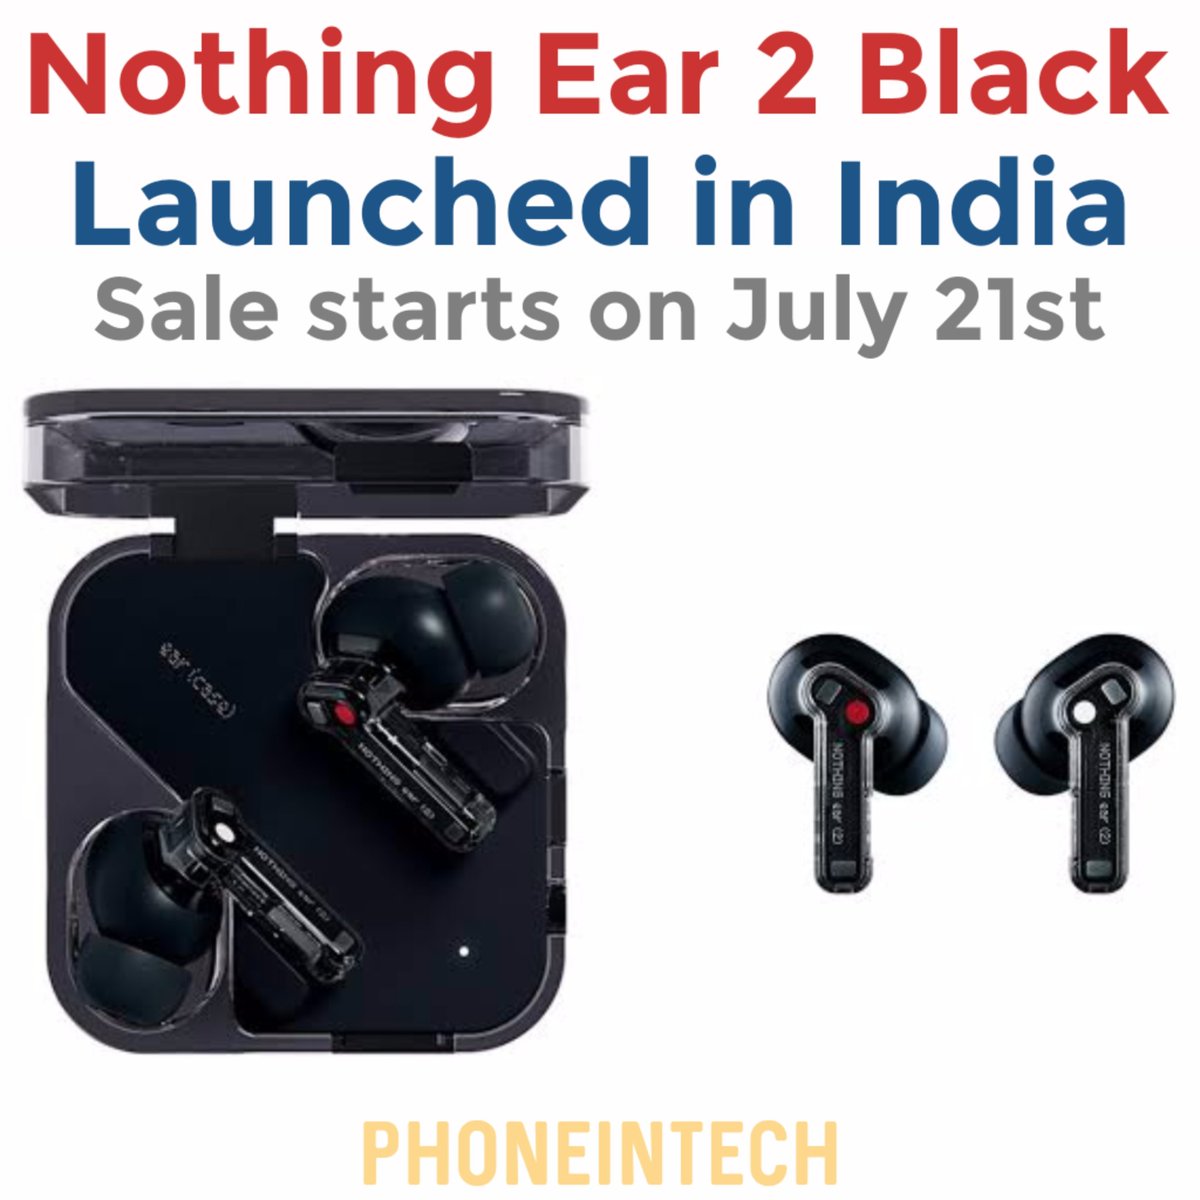 Nothing Ear 2 Black variant launched in India. The sale starts from July 21st and it will be available on Flipkart. Both black and white variants are priced at ₹9,999. 

#nothingear2 #nothingsmartphones #wirelessearphones #earbuds #nothingear #technews